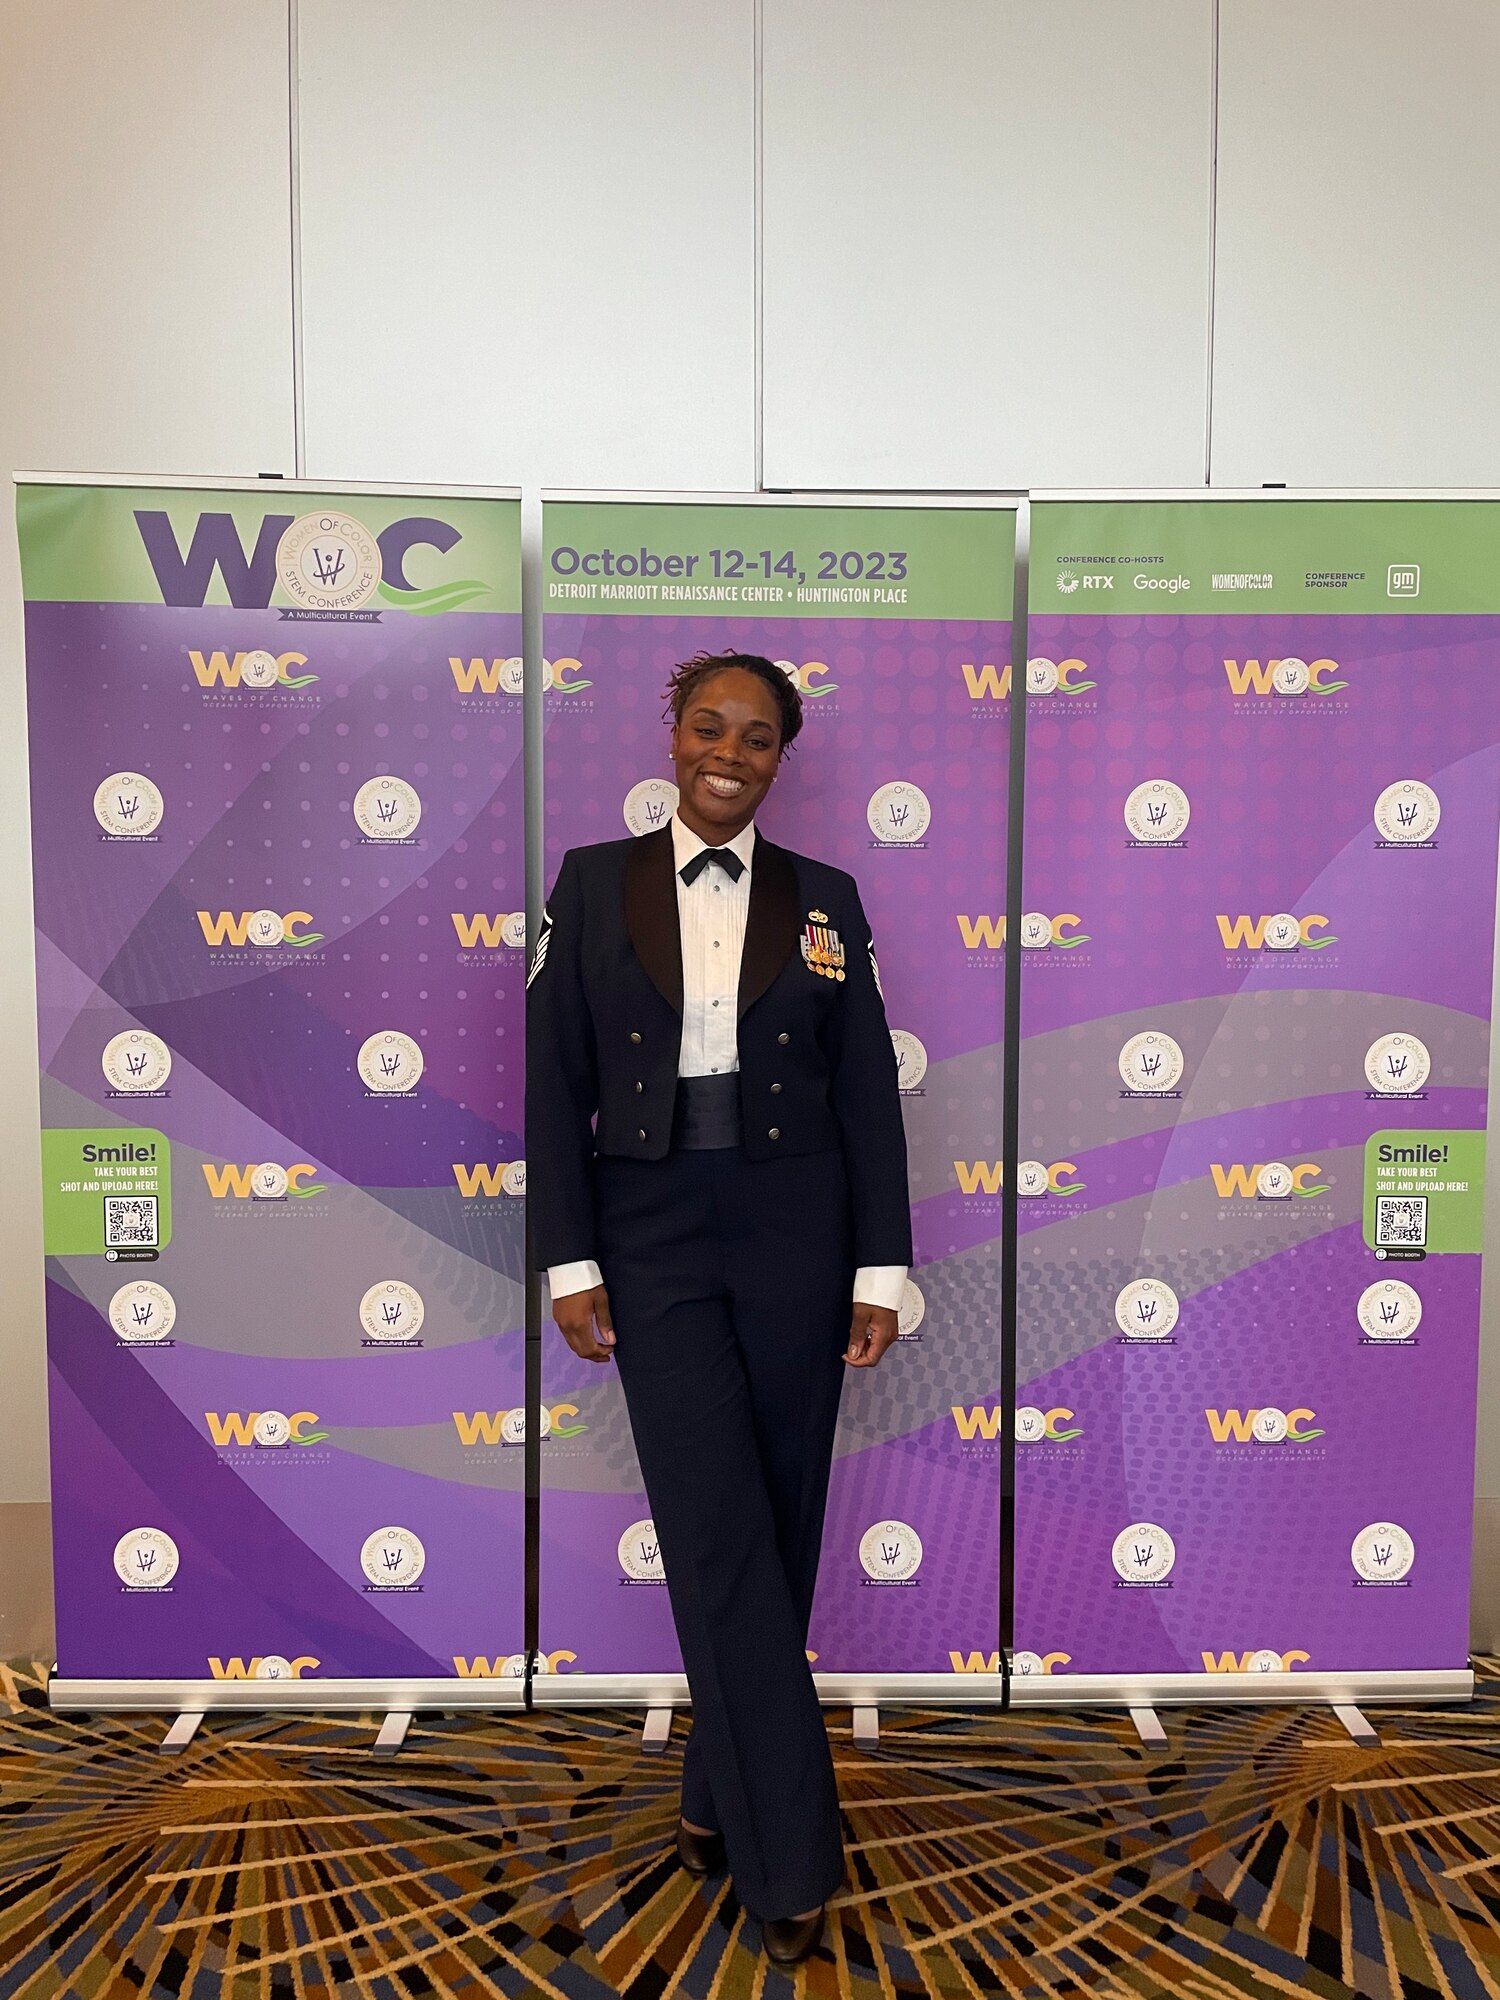 U.S. Air Force Master Sgt. Jazmin Love,  7th Equipment Maintenance Squadron fabrication flight superintendent, poses after being presented with the 2023 Women of Color STEM Technology Rising Star Award at a presentation ceremony in Detroit, Michigan, on October 13, 2023. The Women of Color Awards, founded in 1985, promote minority success in STEM fields by sharing untold stories of striving scientists. (U.S. Air Force Airman 1st Class Alondra Cristobal Hernandez)